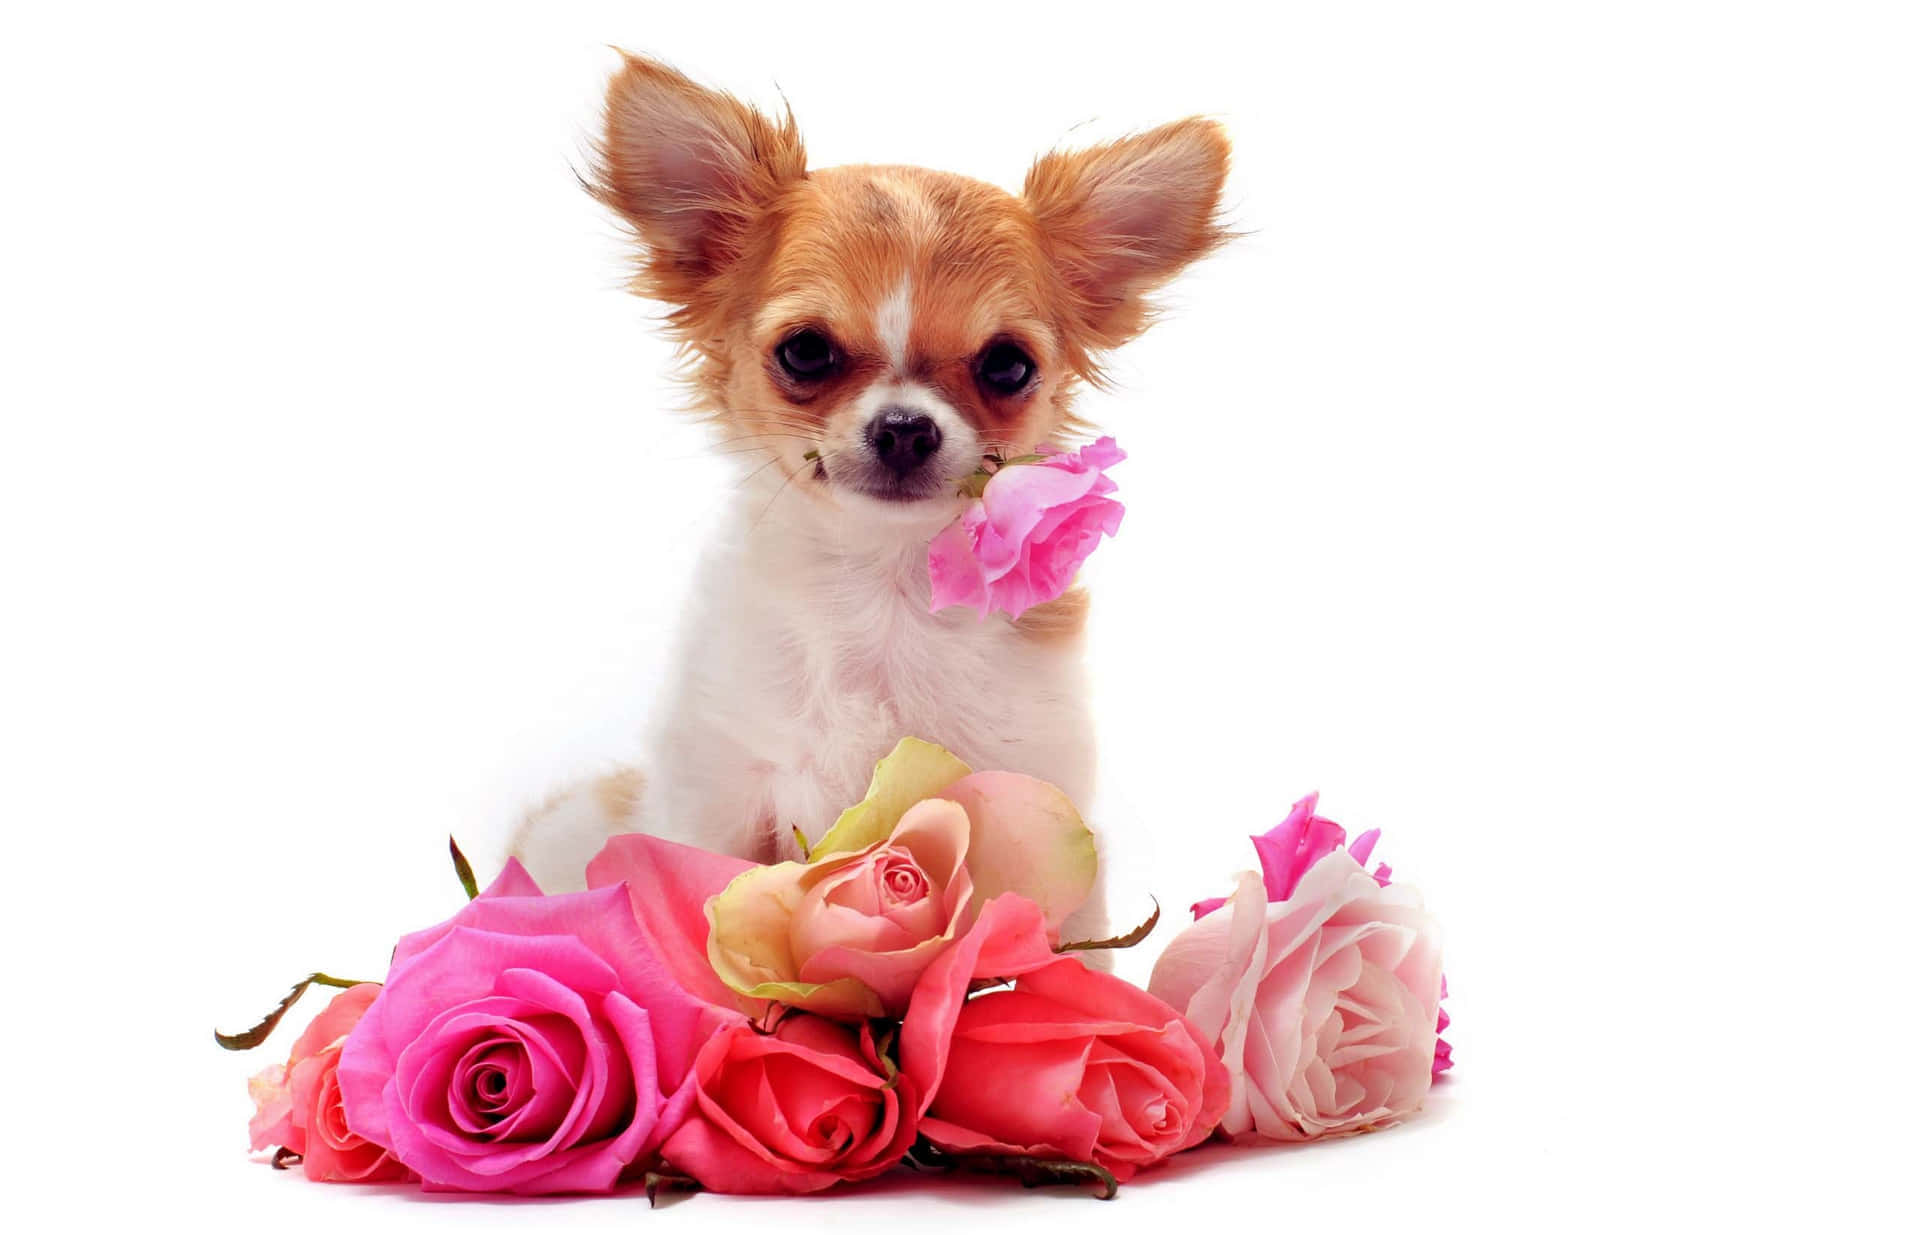 Chihuahua Puppy With Roses Wallpaper